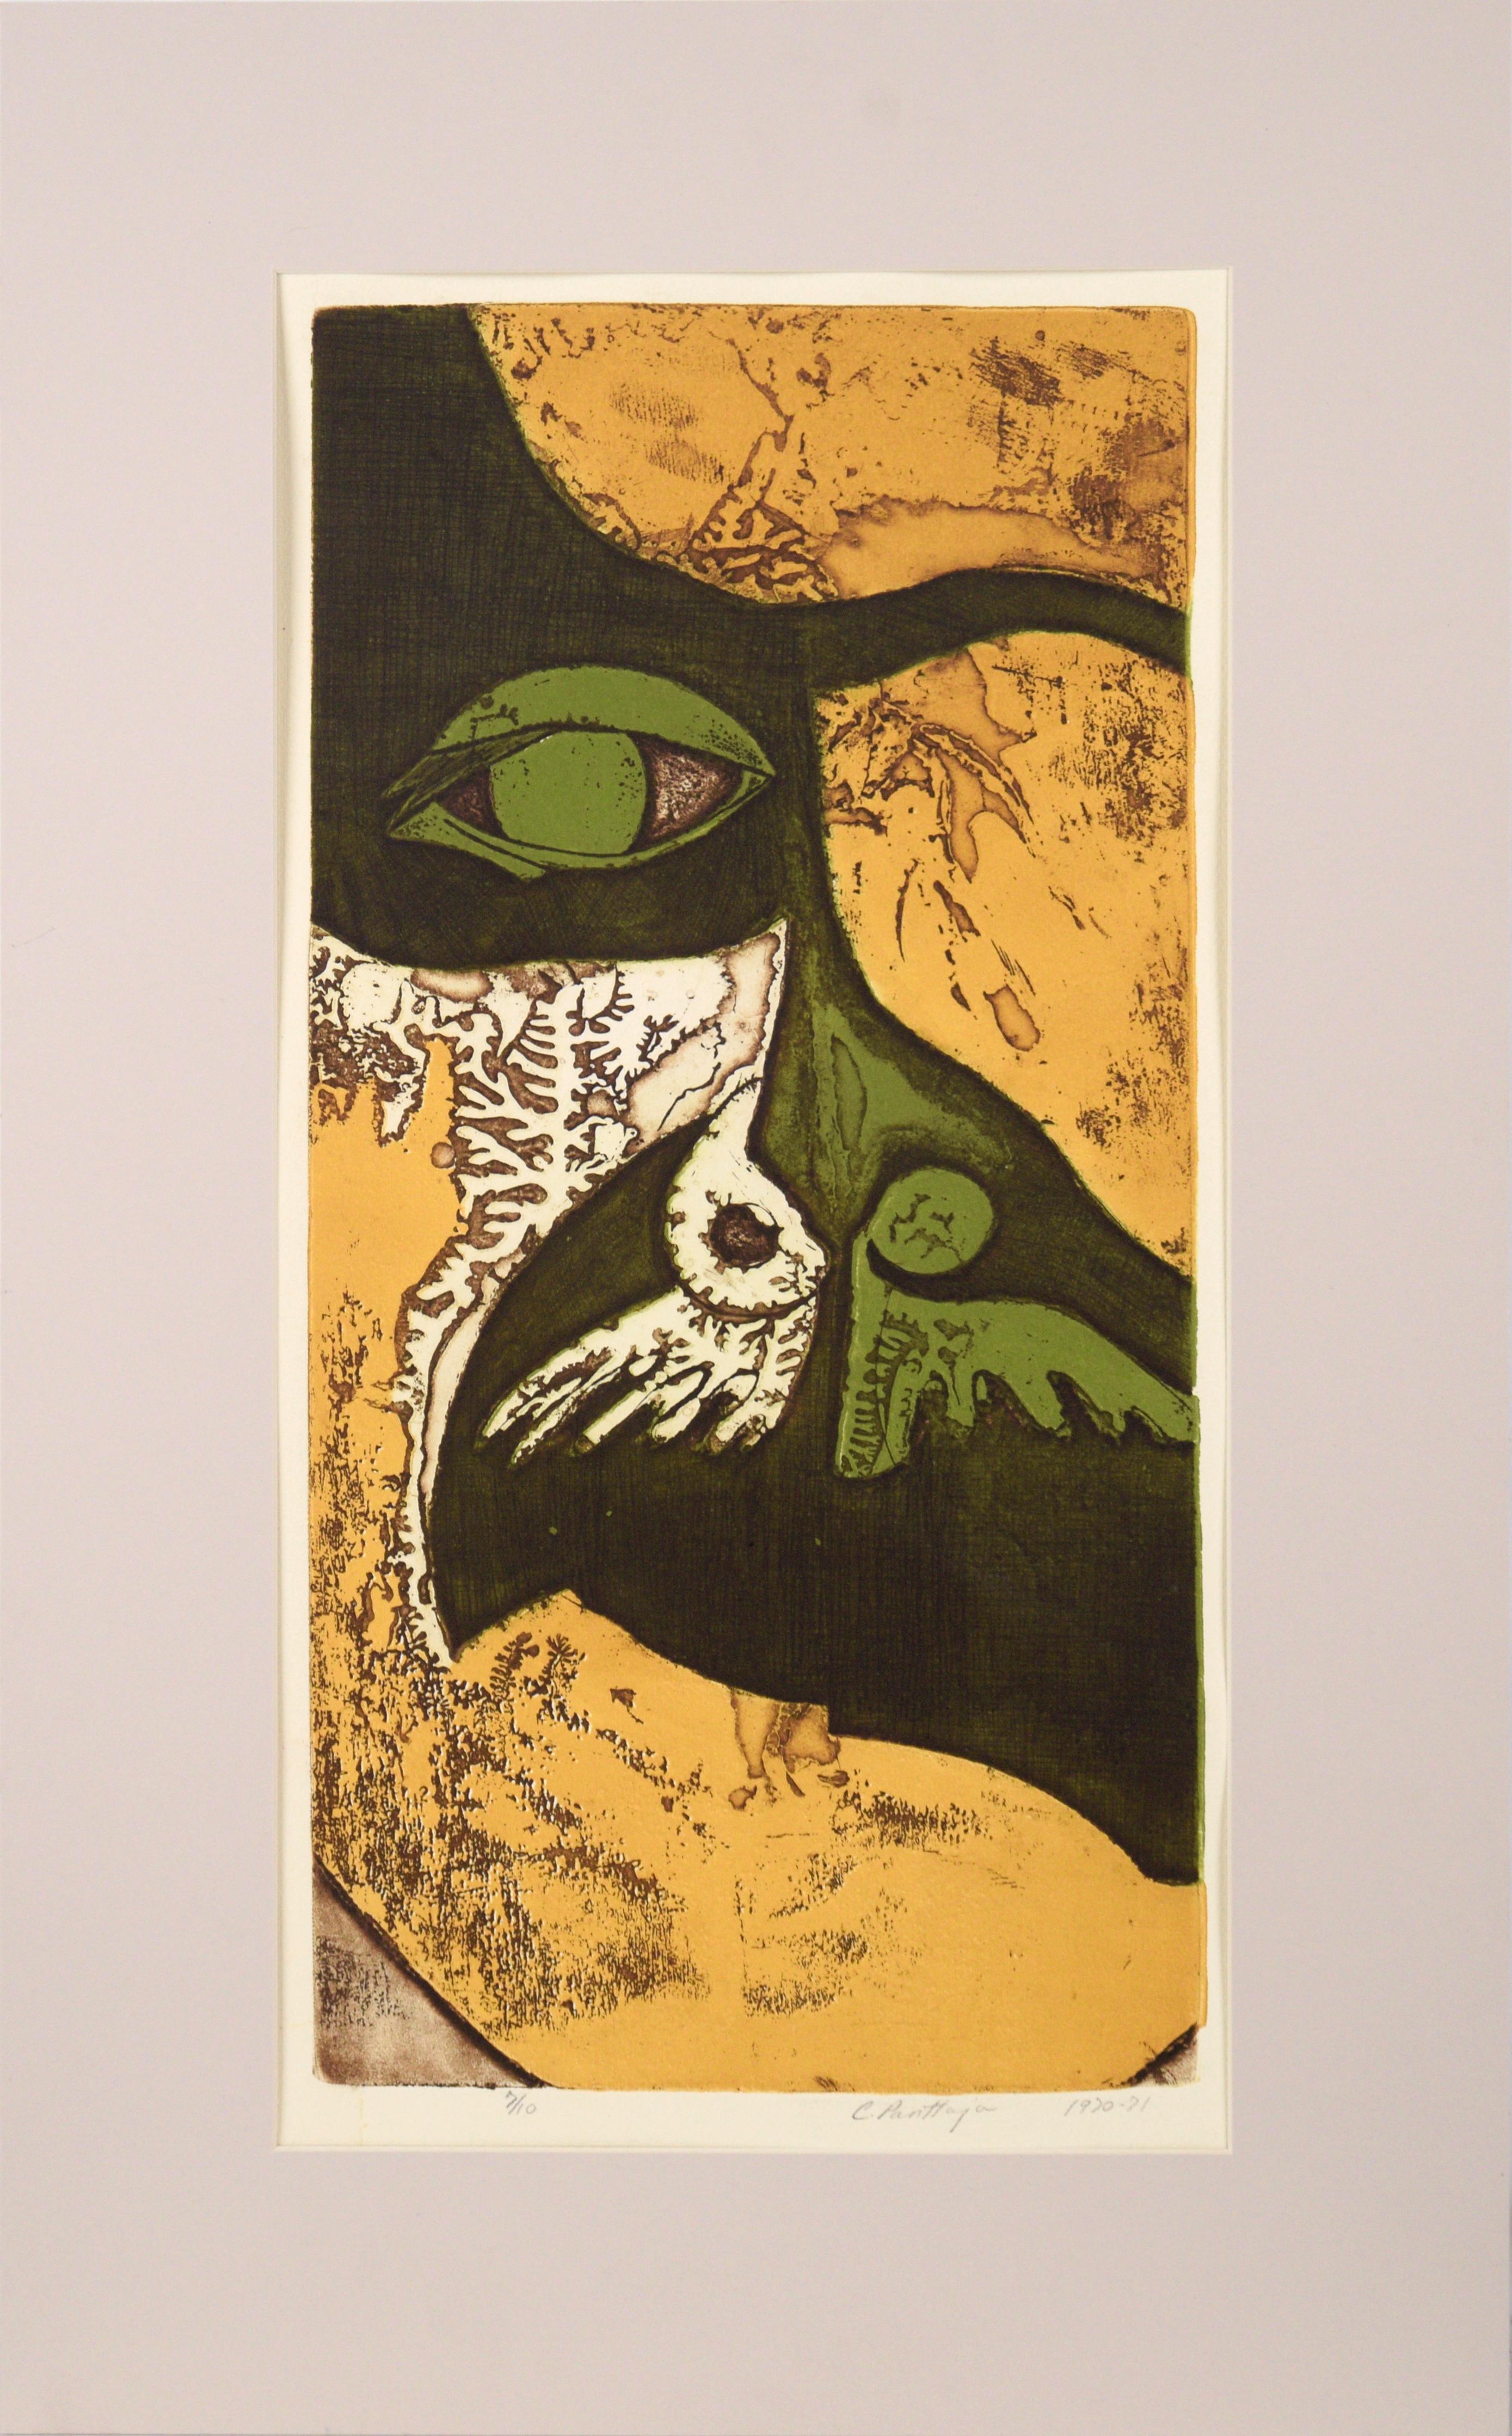 Face with a Mustache - Abstracted Lithograph by Cathleen Panttaja
Hip Woodcut Print done at the height of the Flower Power 60s, of a man with a large Moustache. Cathleen Panttaja (American, 1949-2021.
Cathy was a Berkeley Two year student 1967-1968